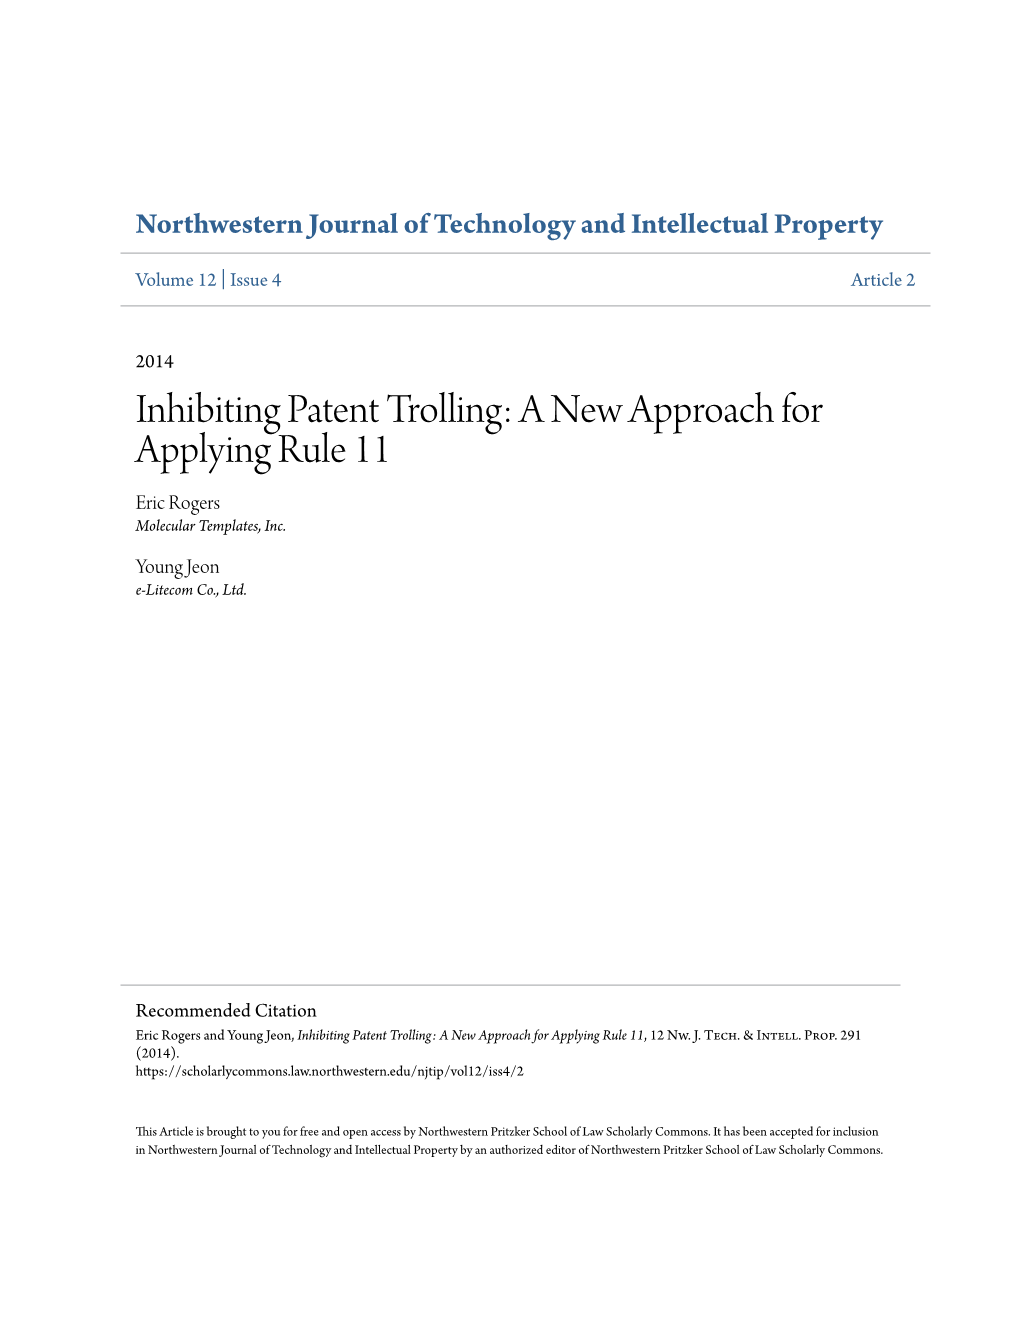 Inhibiting Patent Trolling: a New Approach for Applying Rule 11 Eric Rogers Molecular Templates, Inc